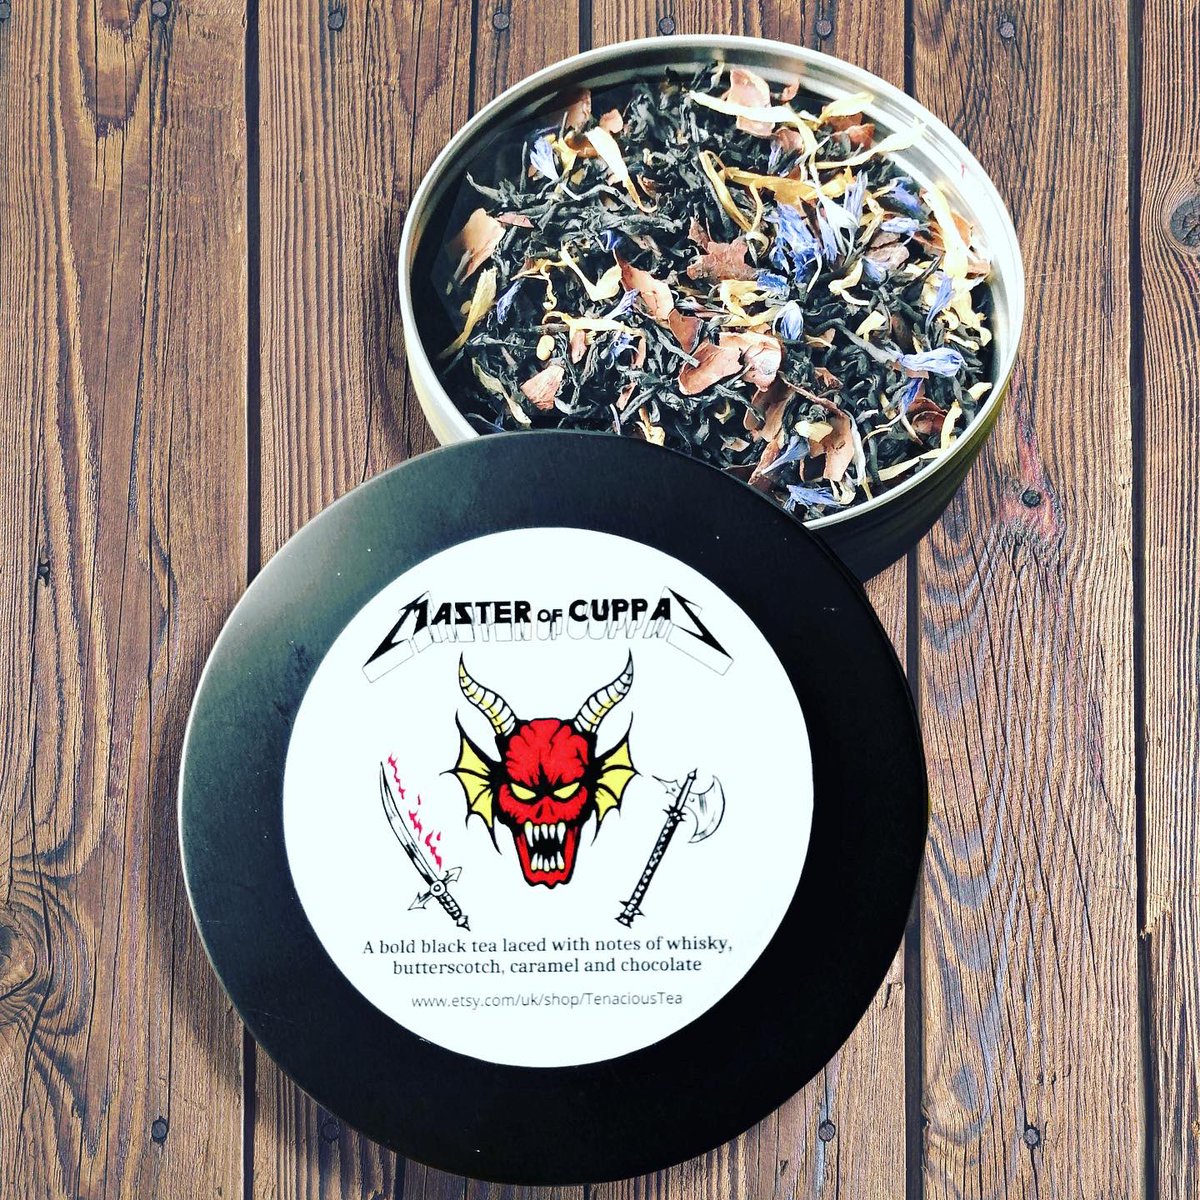 Fancy a brew? You do? Then get yourselves over here to sample some seriously #TenaciousTea!🤘🏻🫖🤘🏻

But this ain’t just tea. It’s #HeavyMetal inspired tea, no less!  

Today we launch our very own collab #DarkEarth blend 🖤

#RSD23 #TeaTasting  #IndieRecordShop #DarkEarthRSD